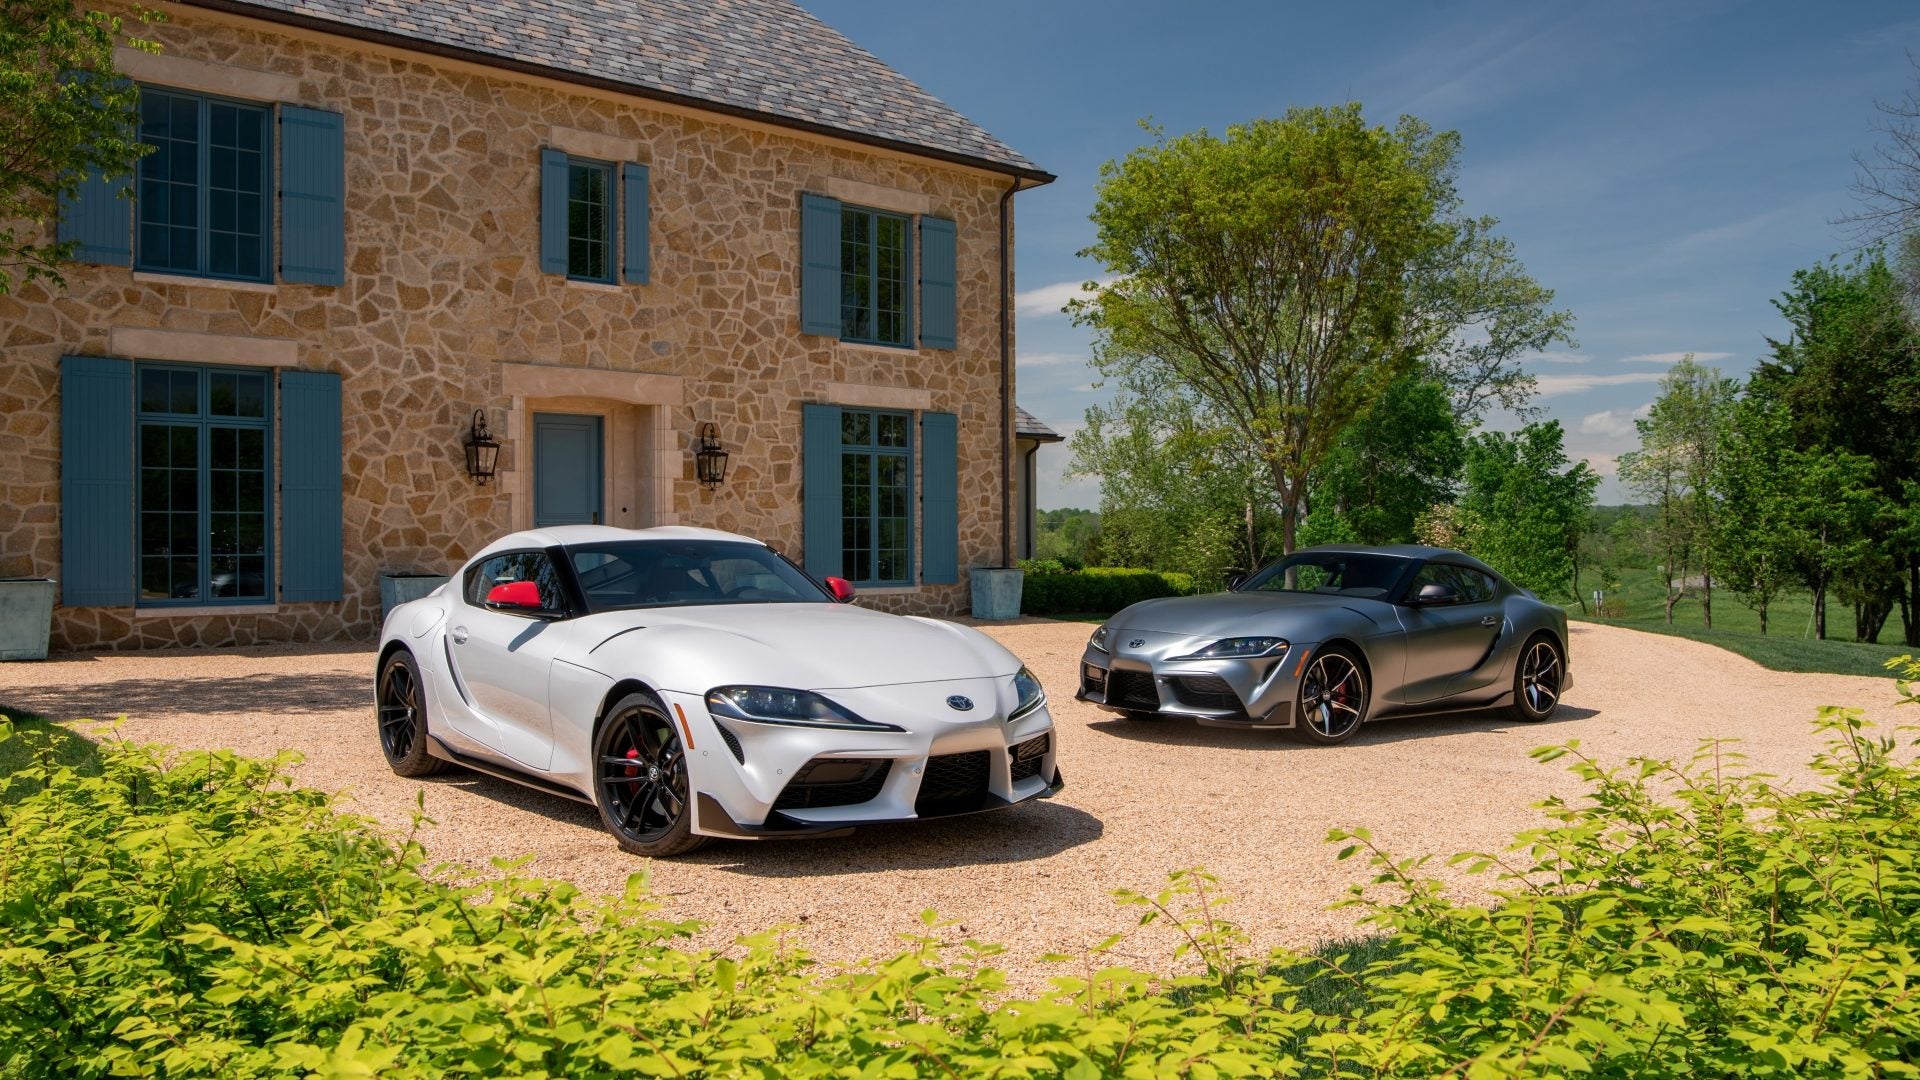 Florida Toyota Dealer Selling 2020 Supra With Outrageous $40,000 Markup